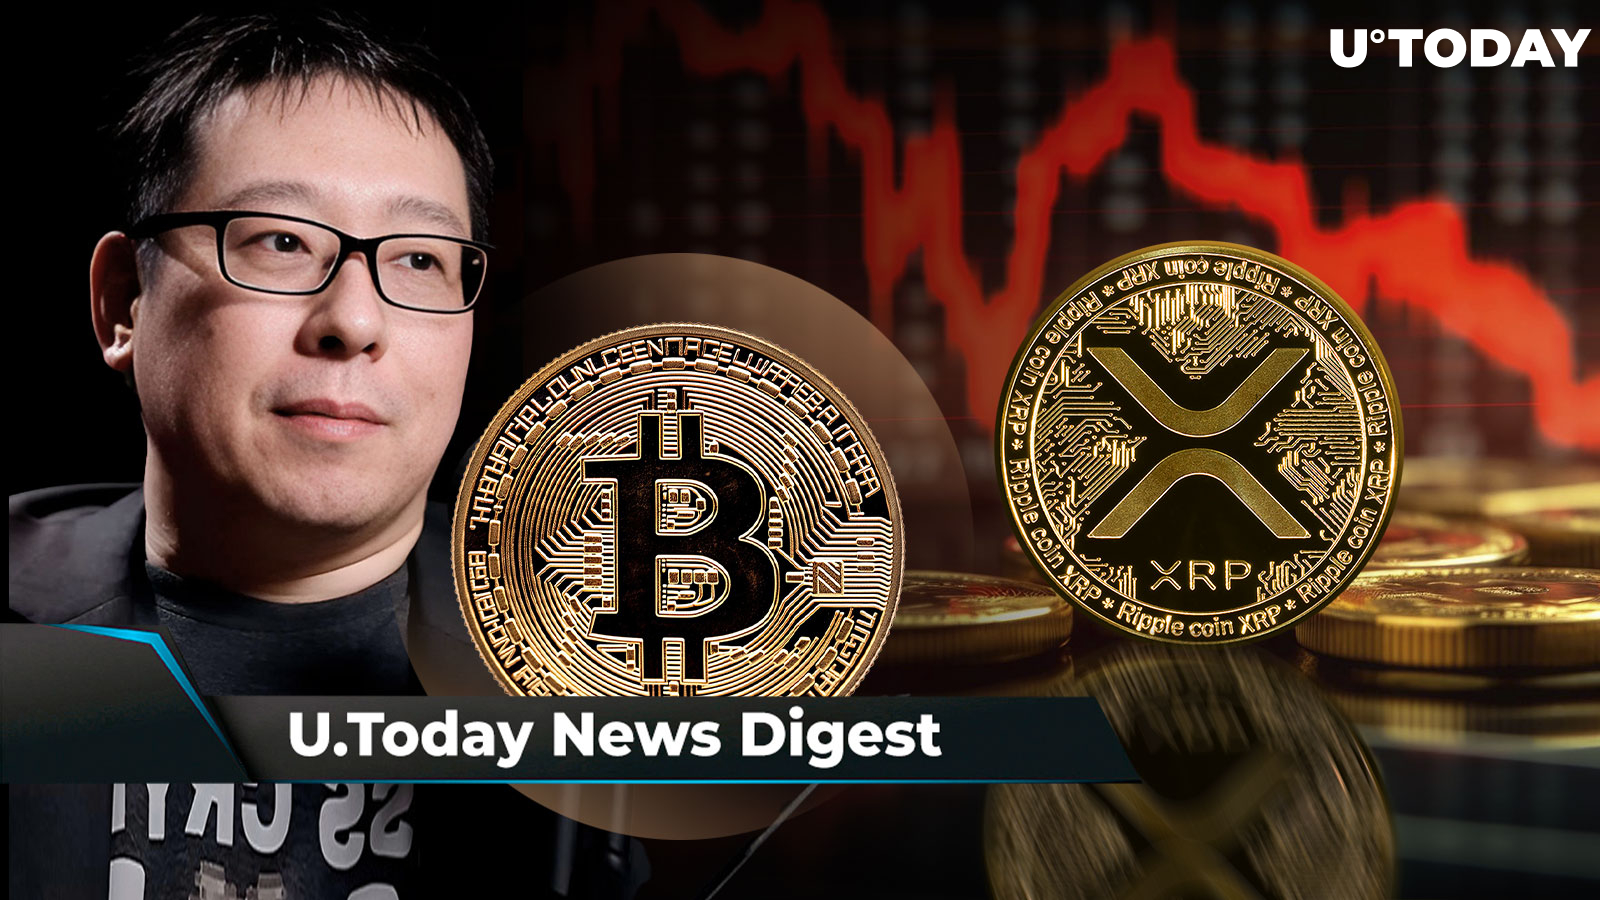 XRP at Center of Heated Debate, Samson Mow Makes Crucial Bitcoin Statement, Shiba Inu About to Break 1.3 Trillion SHIB Resistance: Crypto News Digest by U.Today